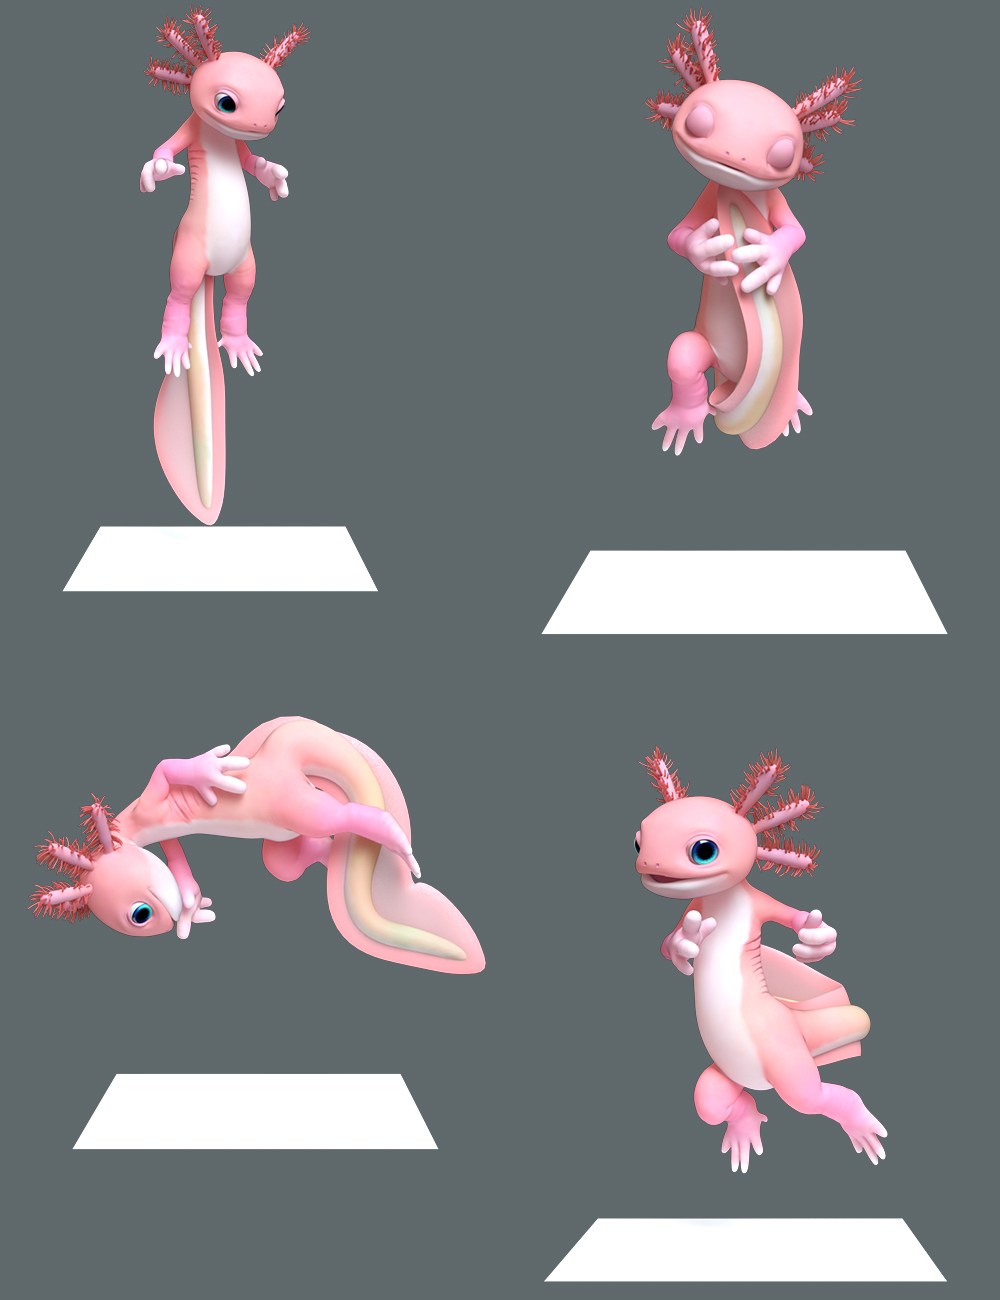 Ajolote Hierarchical Poses for Toon Axolotl by: Ensary, 3D Models by Daz 3D